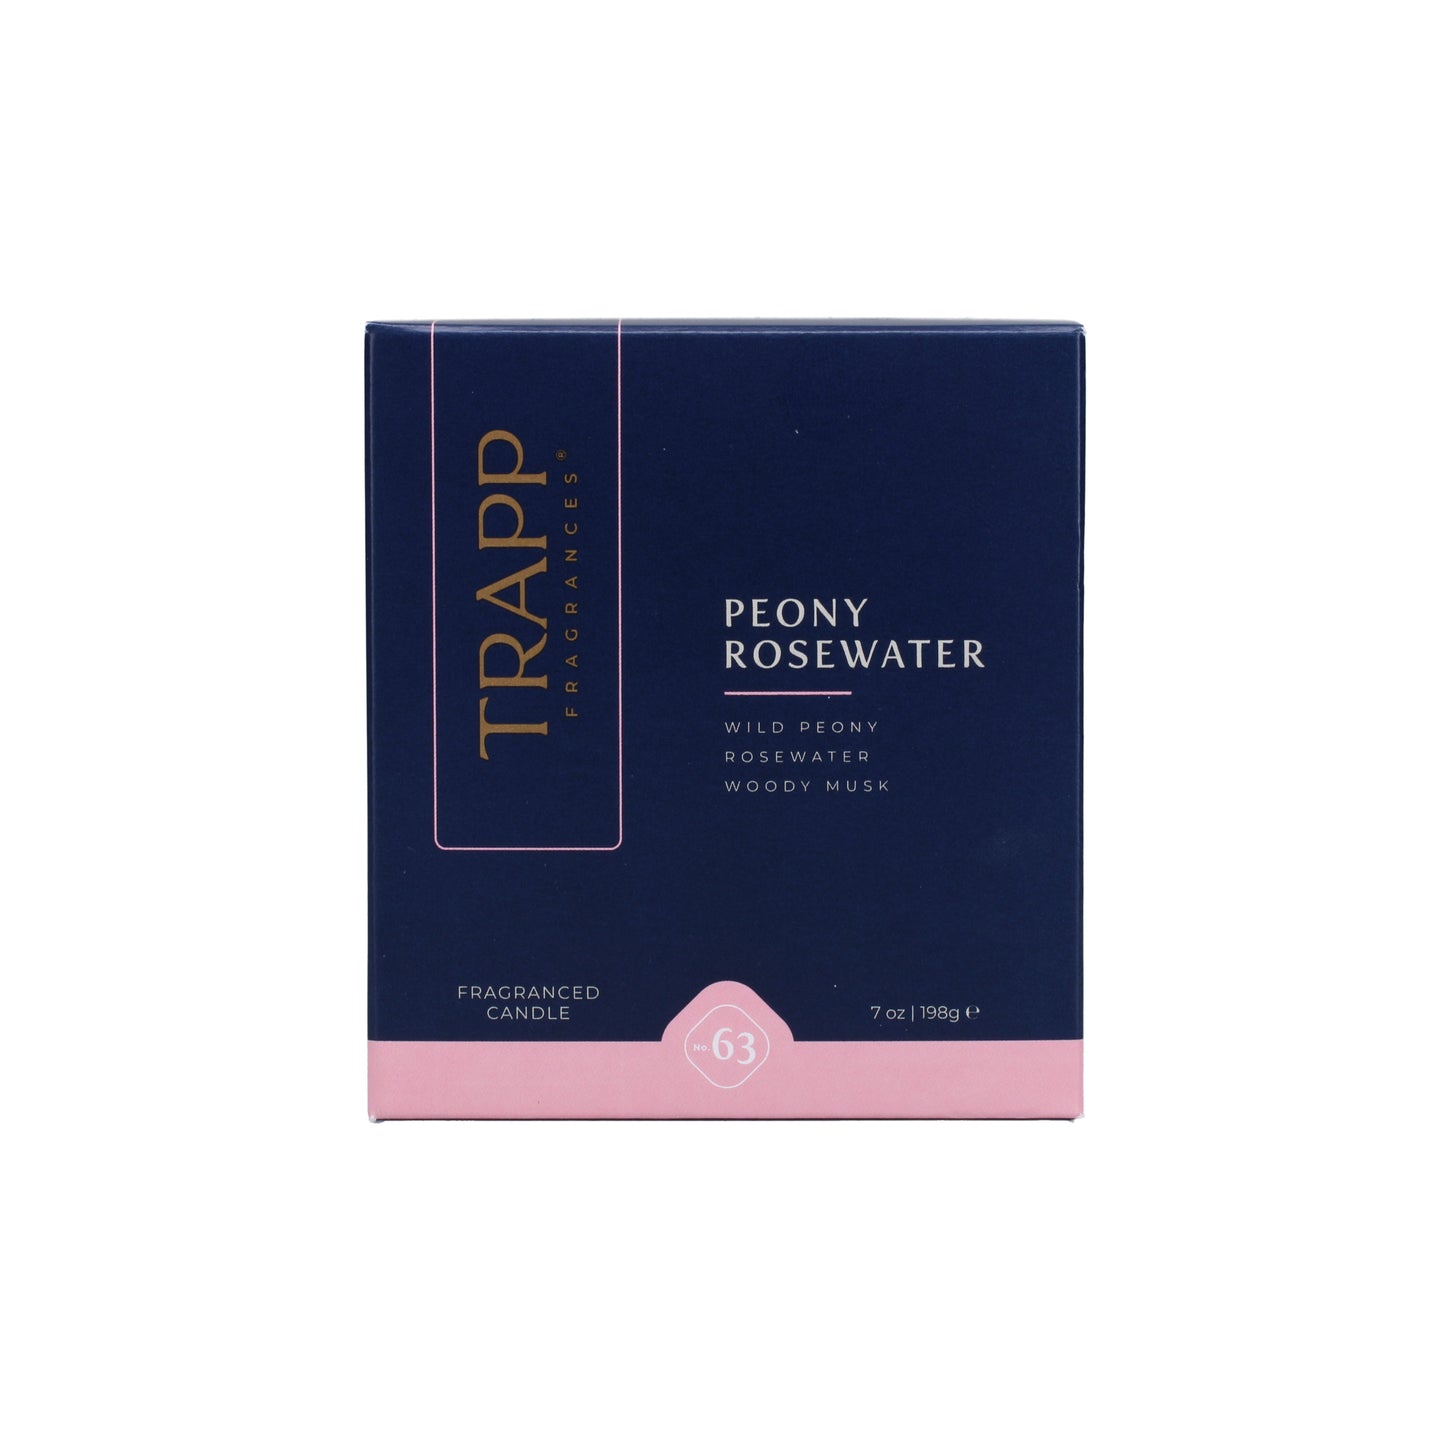 No. 63 Peony Rosewater 7 oz. Candle in Signature Box Image 3